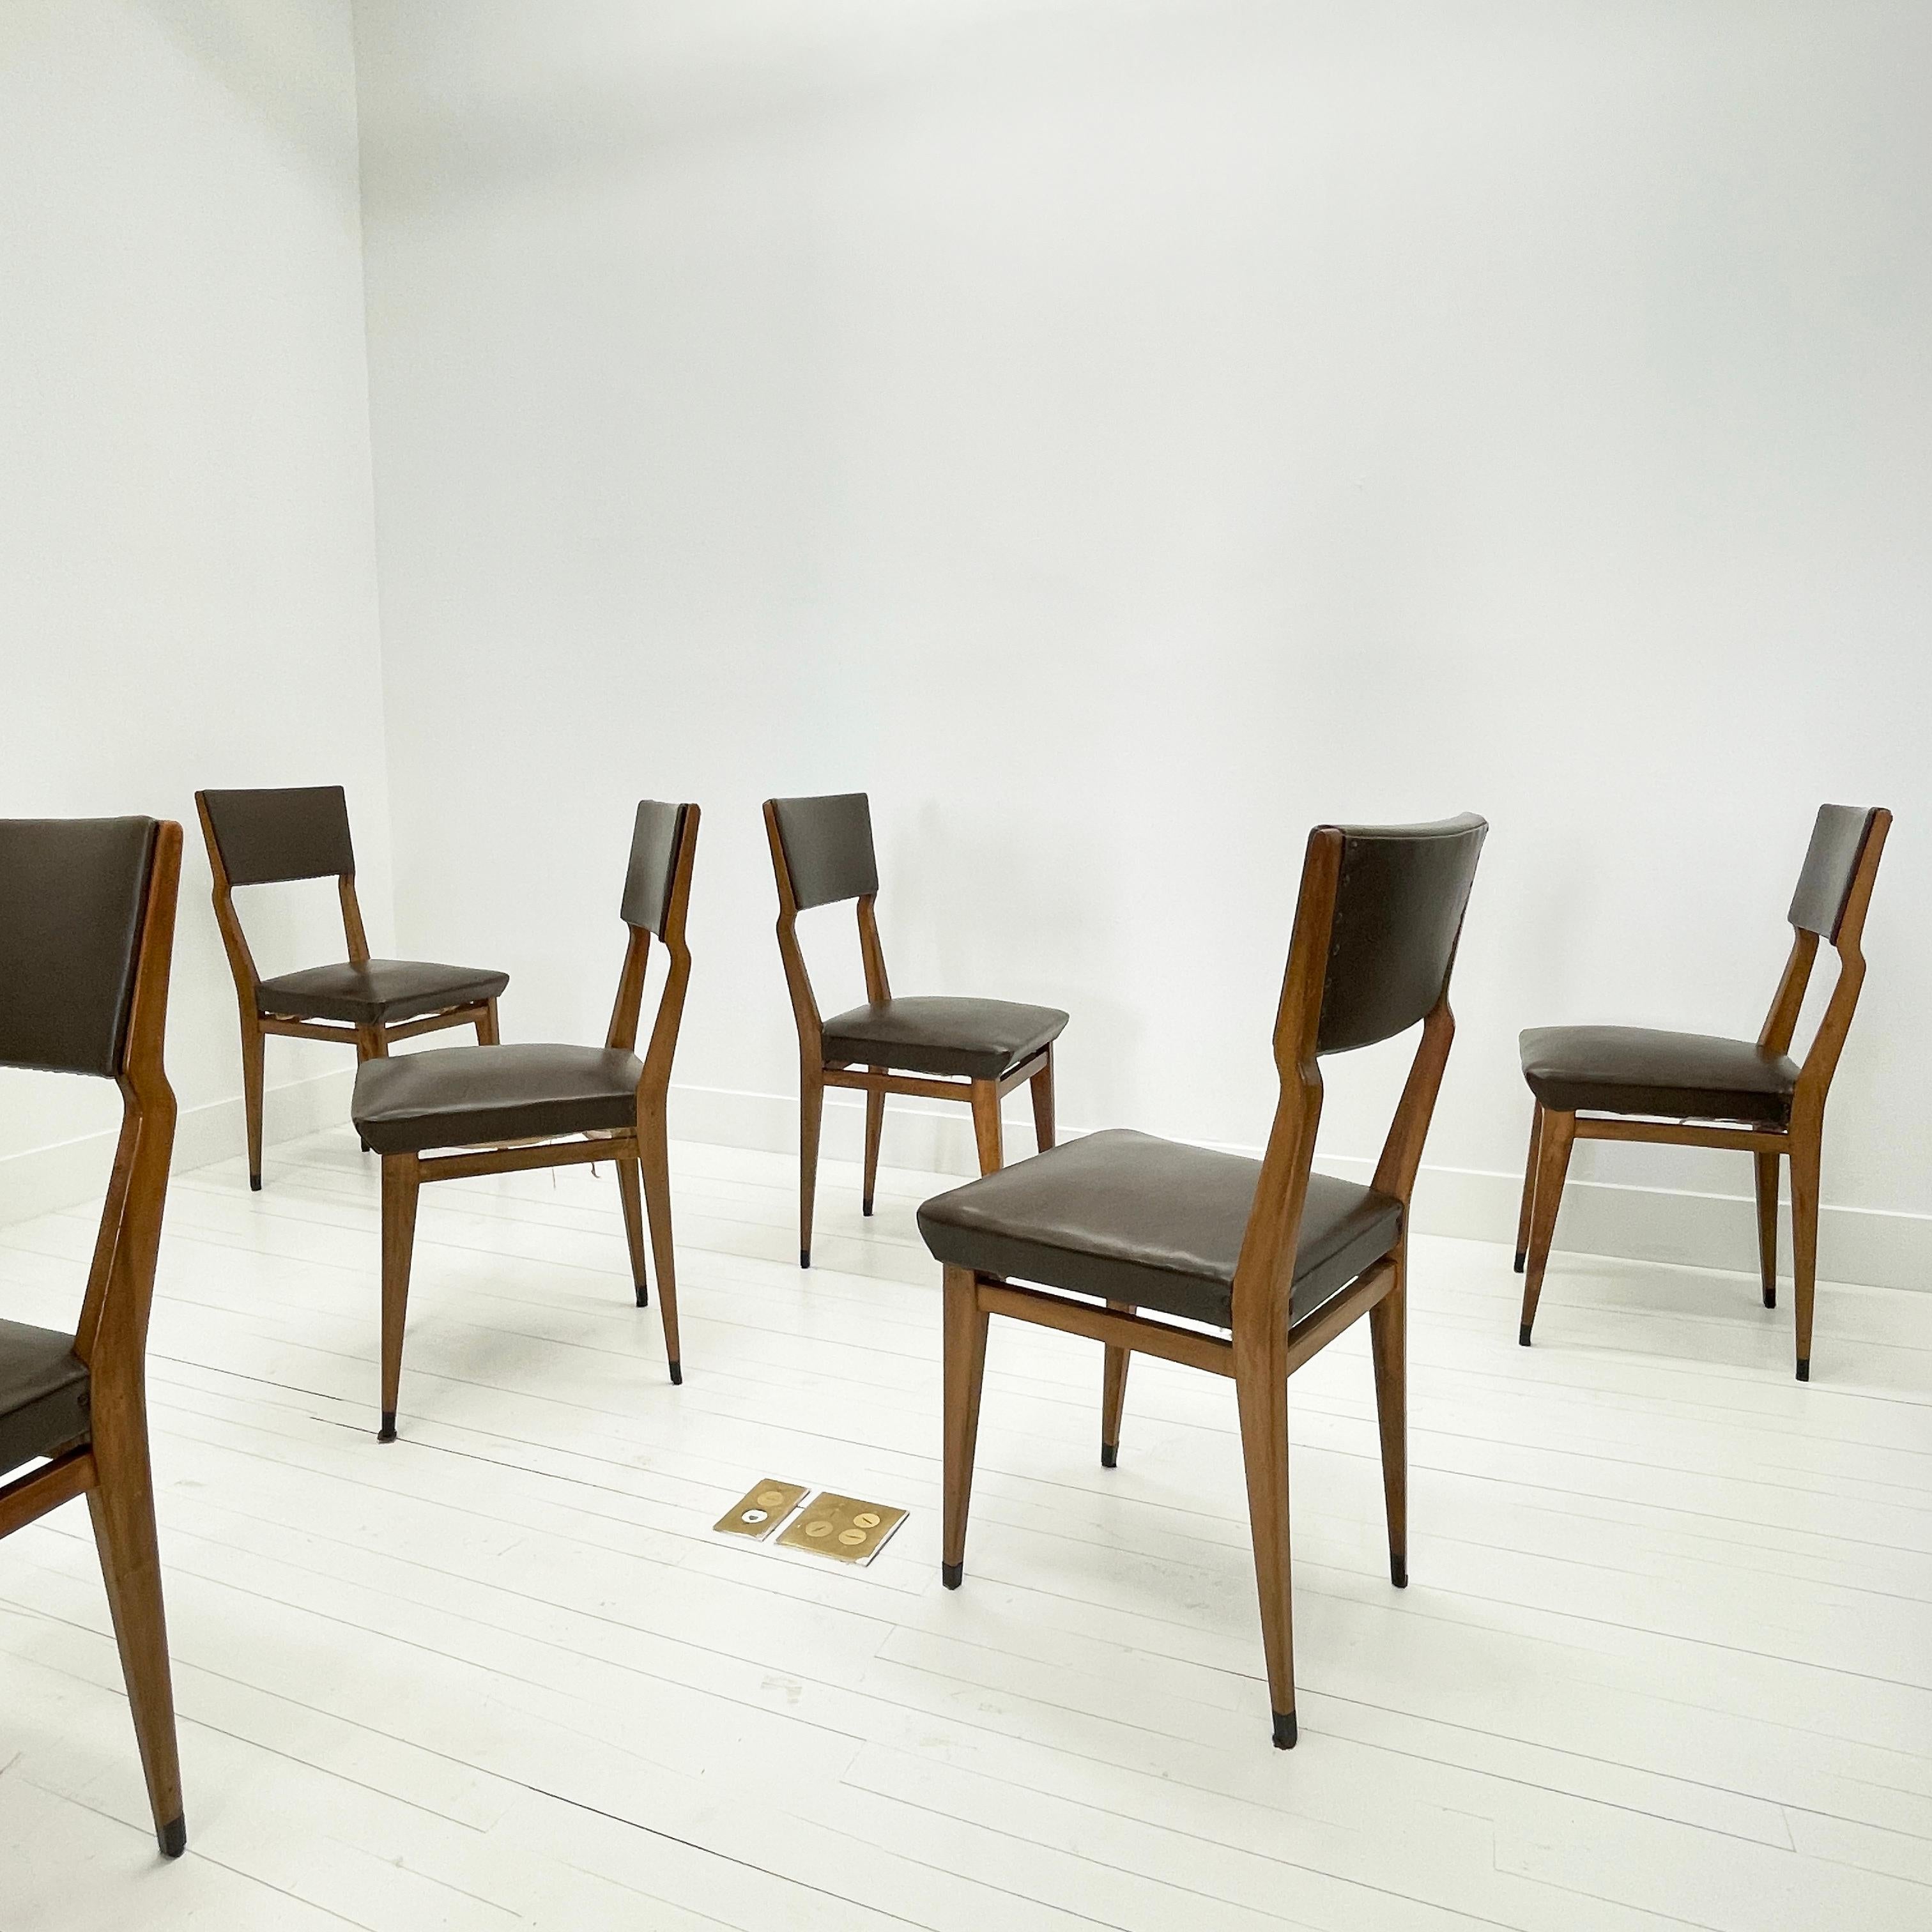 Set of 6 Walnut Dining Chairs, Italy, 1960's

This great looking set of refined, spare dining chairs have a distinctive carved offset detail to the frame. Their trim profile belies their sturdy nature -- Made of solid walnut with sprung seats and